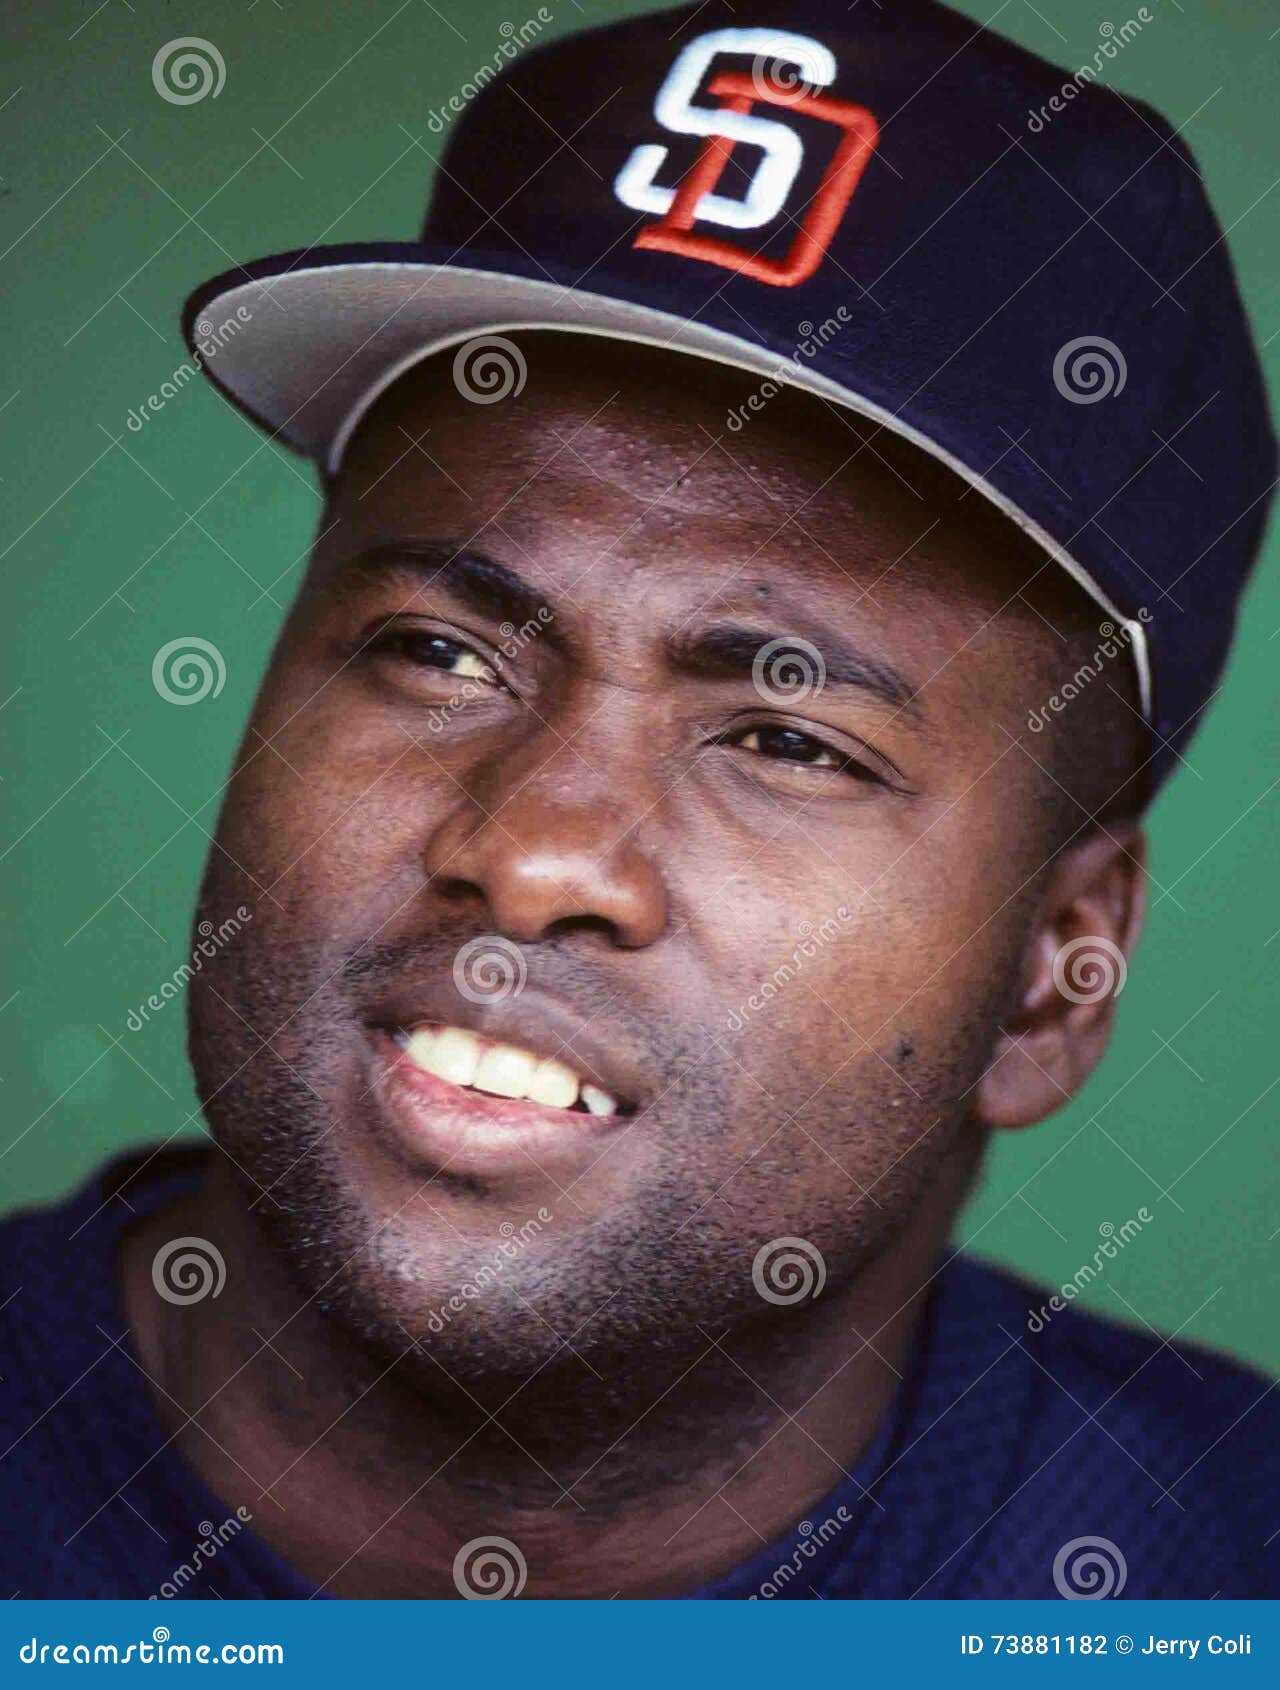 AT90 Tony Gwynn Padres in a batting stance Photo